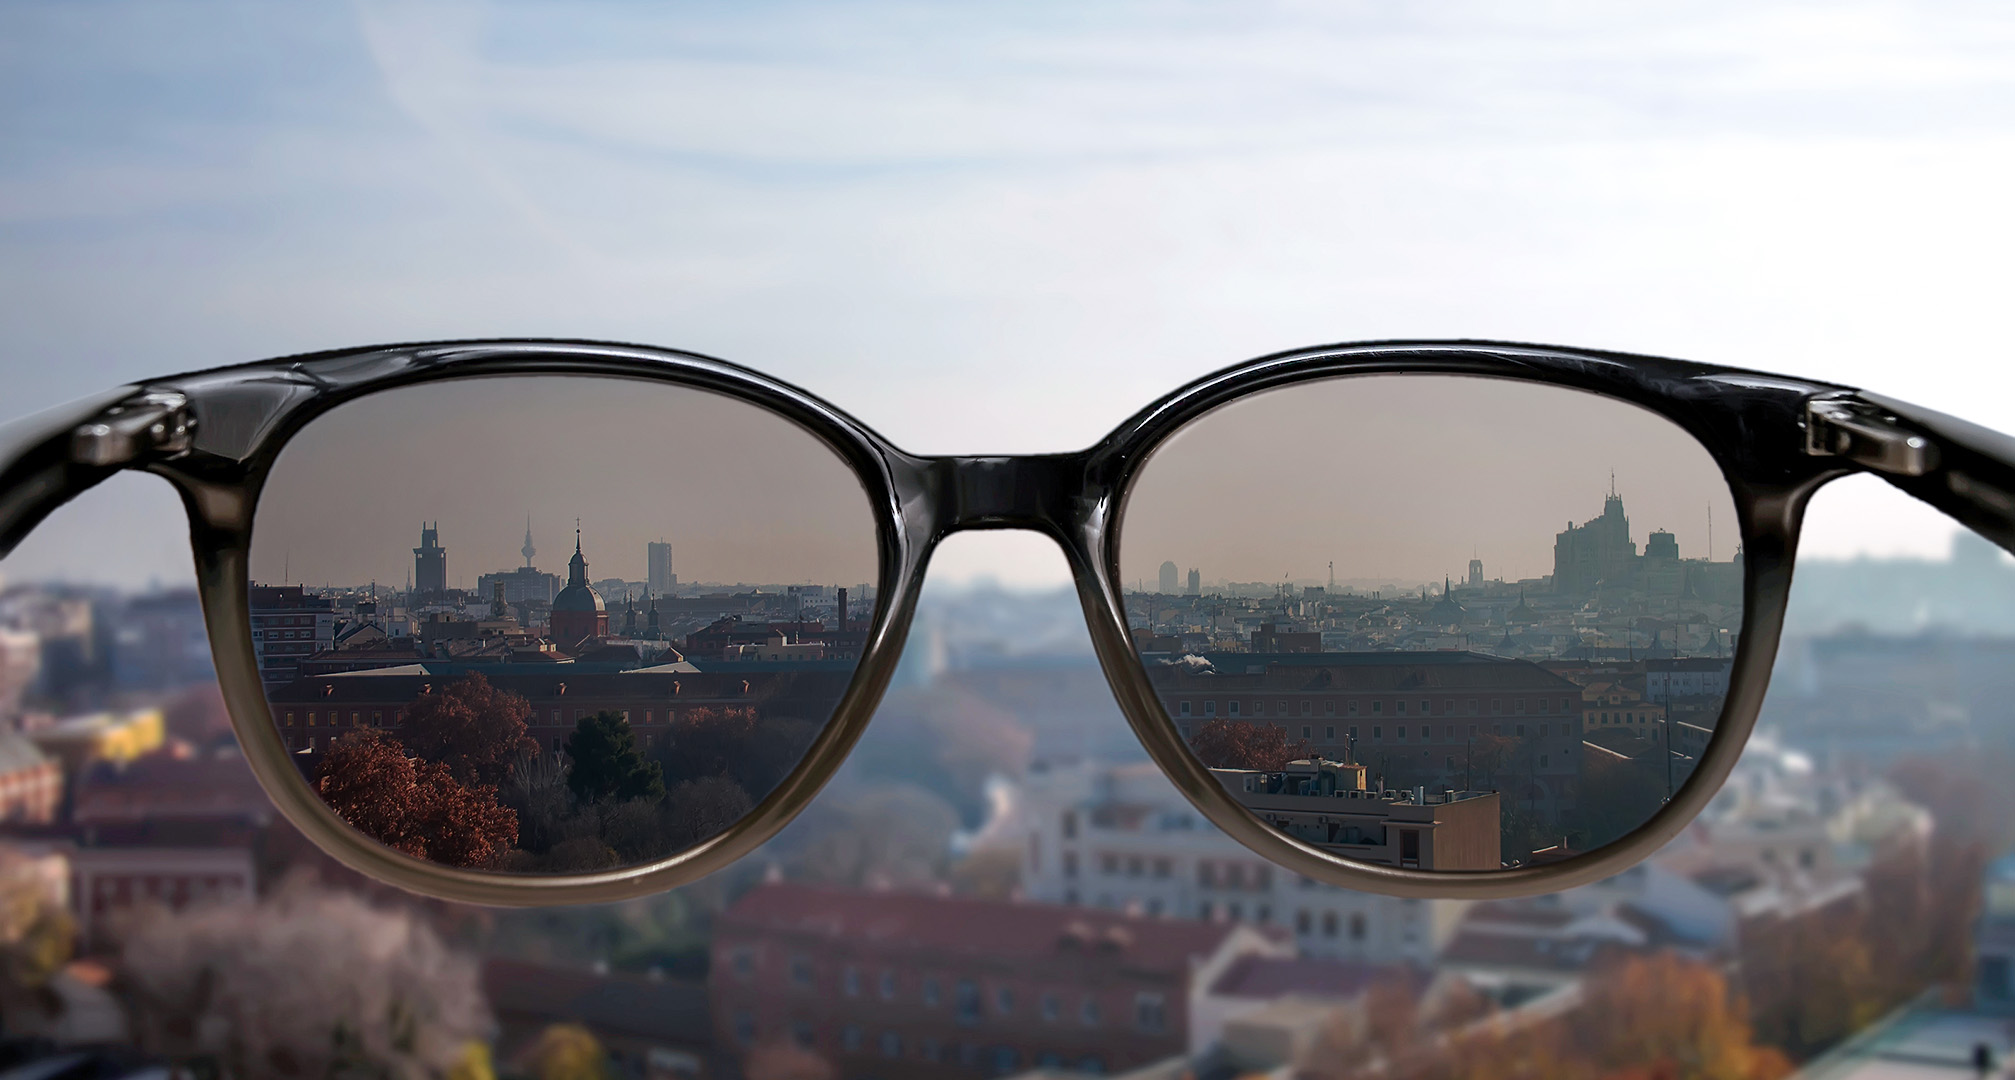 sunglasses held in front of cityscape in background